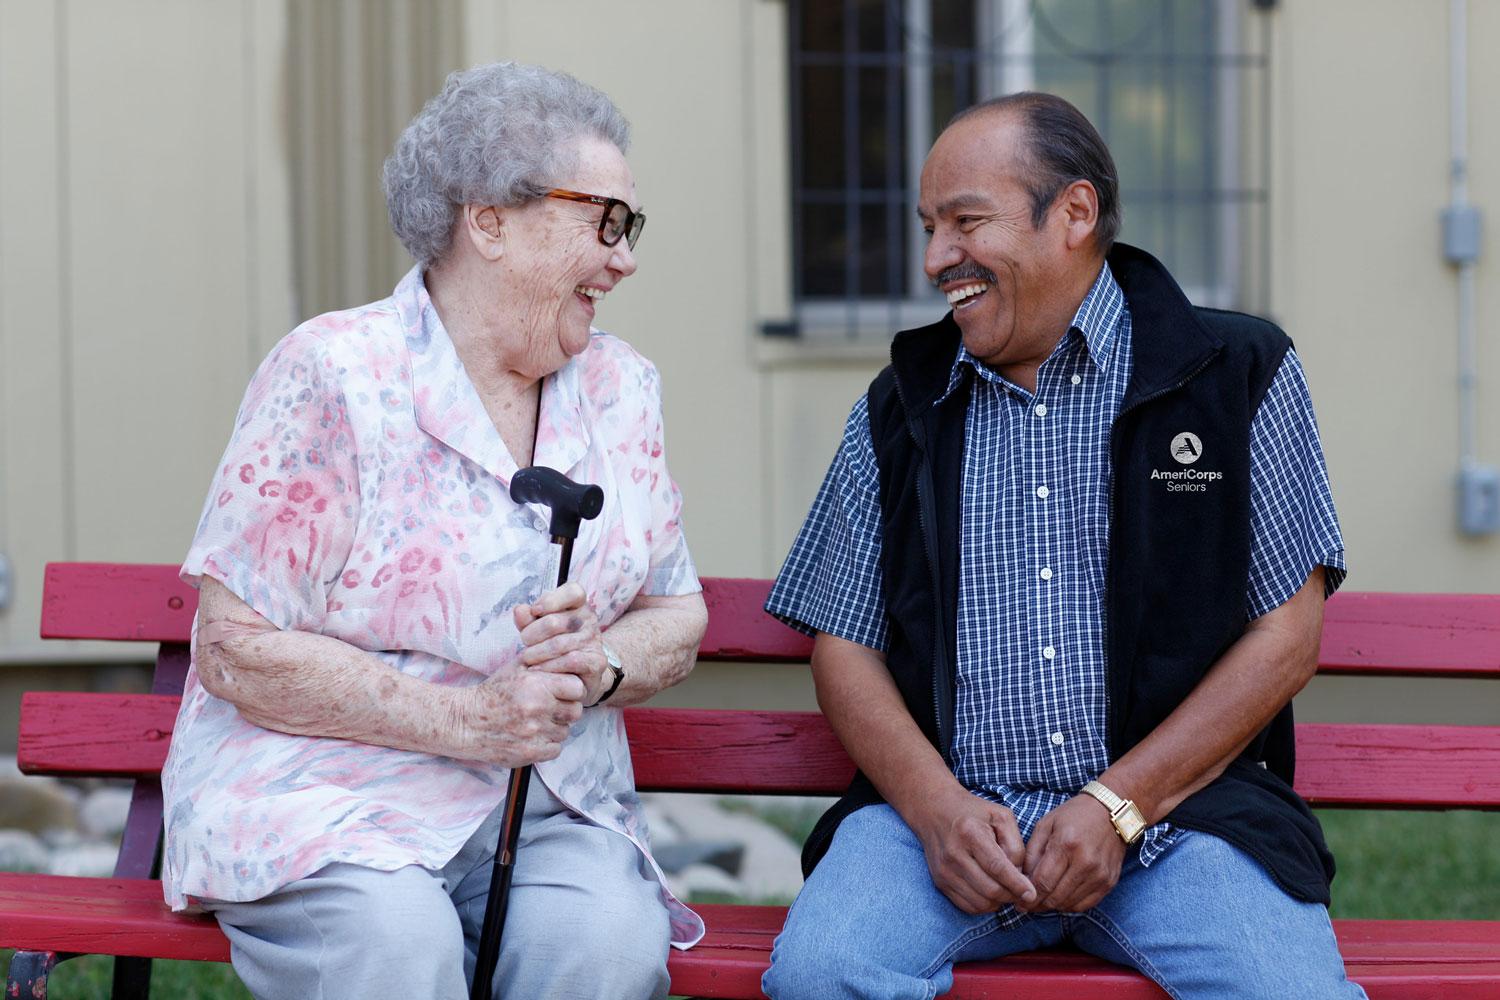 AmeriCorps Seniors volunteer laughing with a woman on a bench